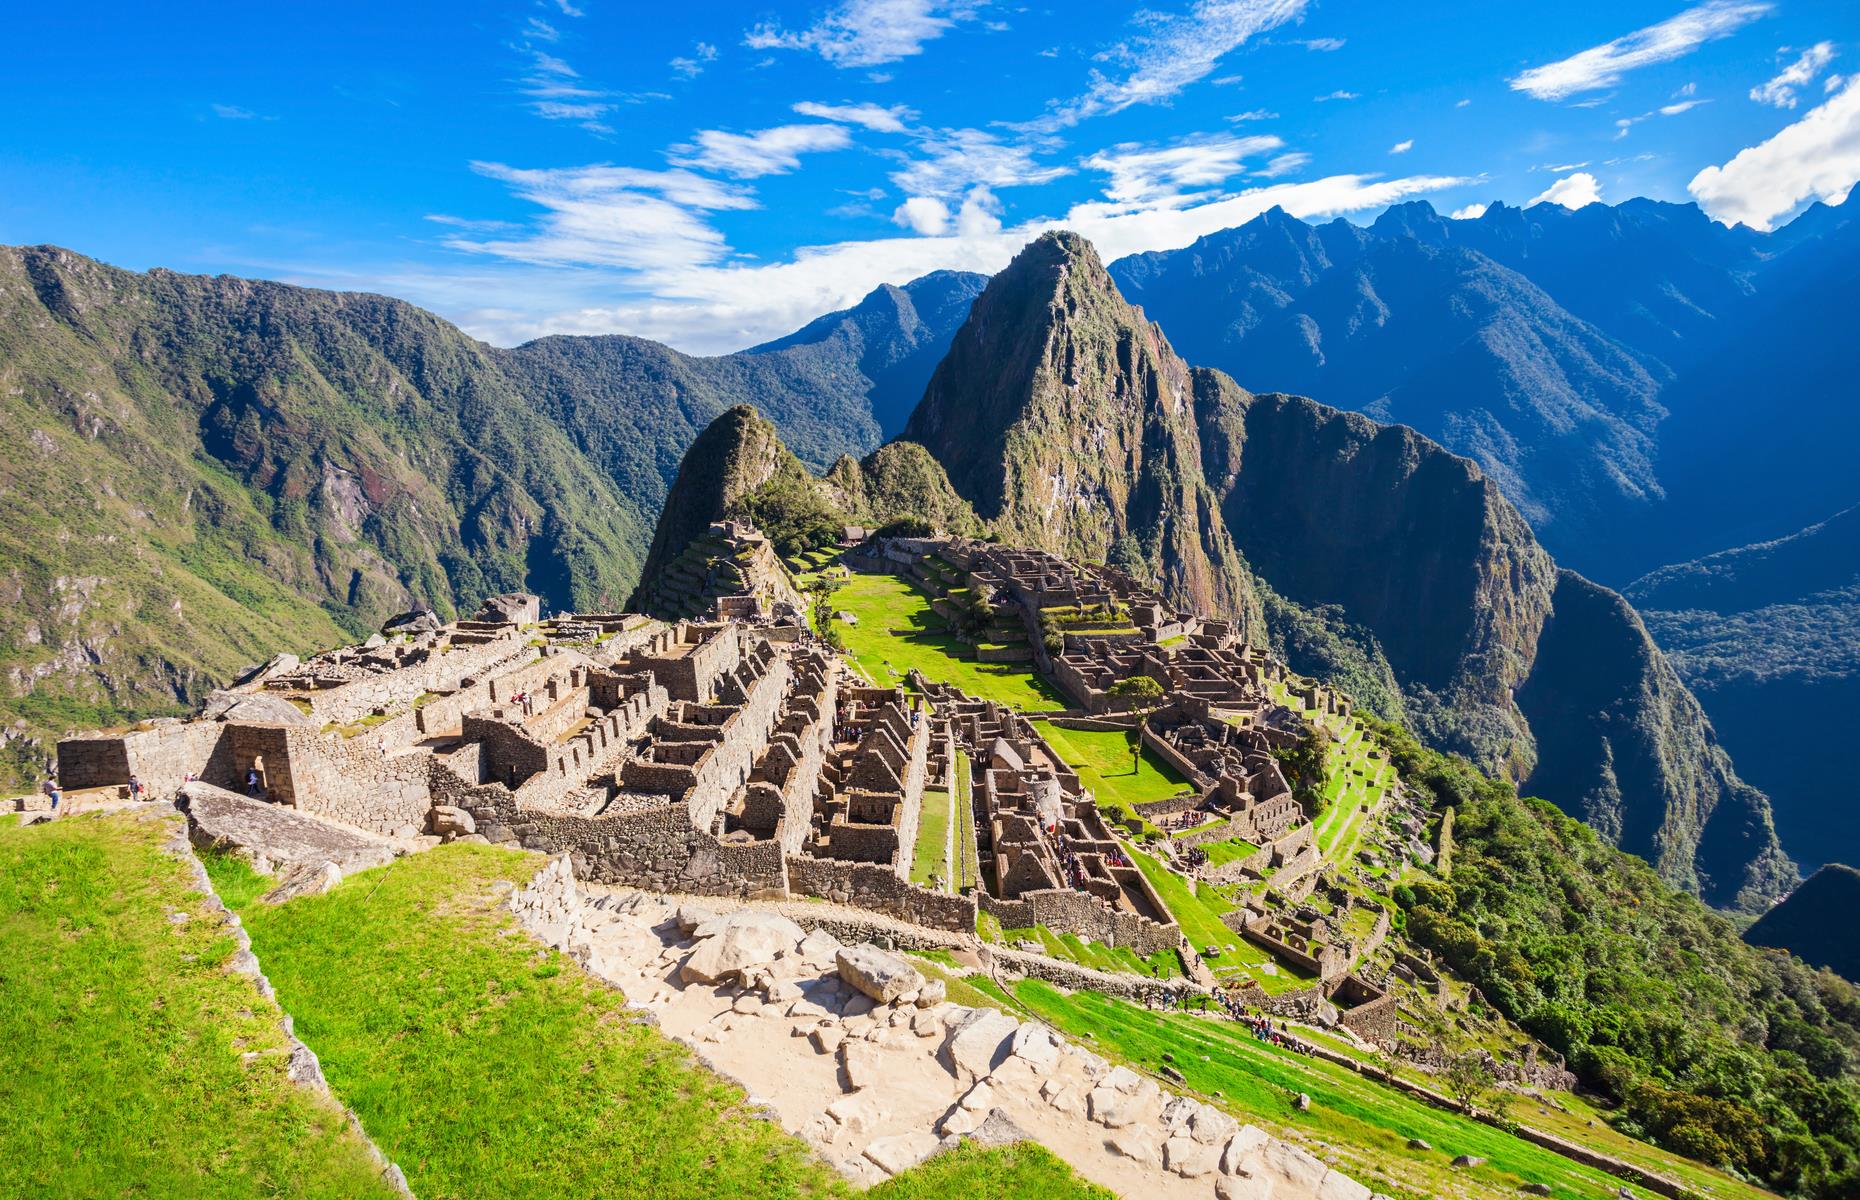 Peru's national treasure tops many people's travel bucket lists. The lofty "lost" Andean city is truly awe-inspiring, but the fragile site is suffering from its popularity. Rediscovered by American explorer Hiram Bingham in 1911, the city housed a maximum population of 1,000 at its peak, but tourist numbers eventually rose to 5,000 visitors per day in peak season, putting enormous pressure on the monument’s paths and steps.